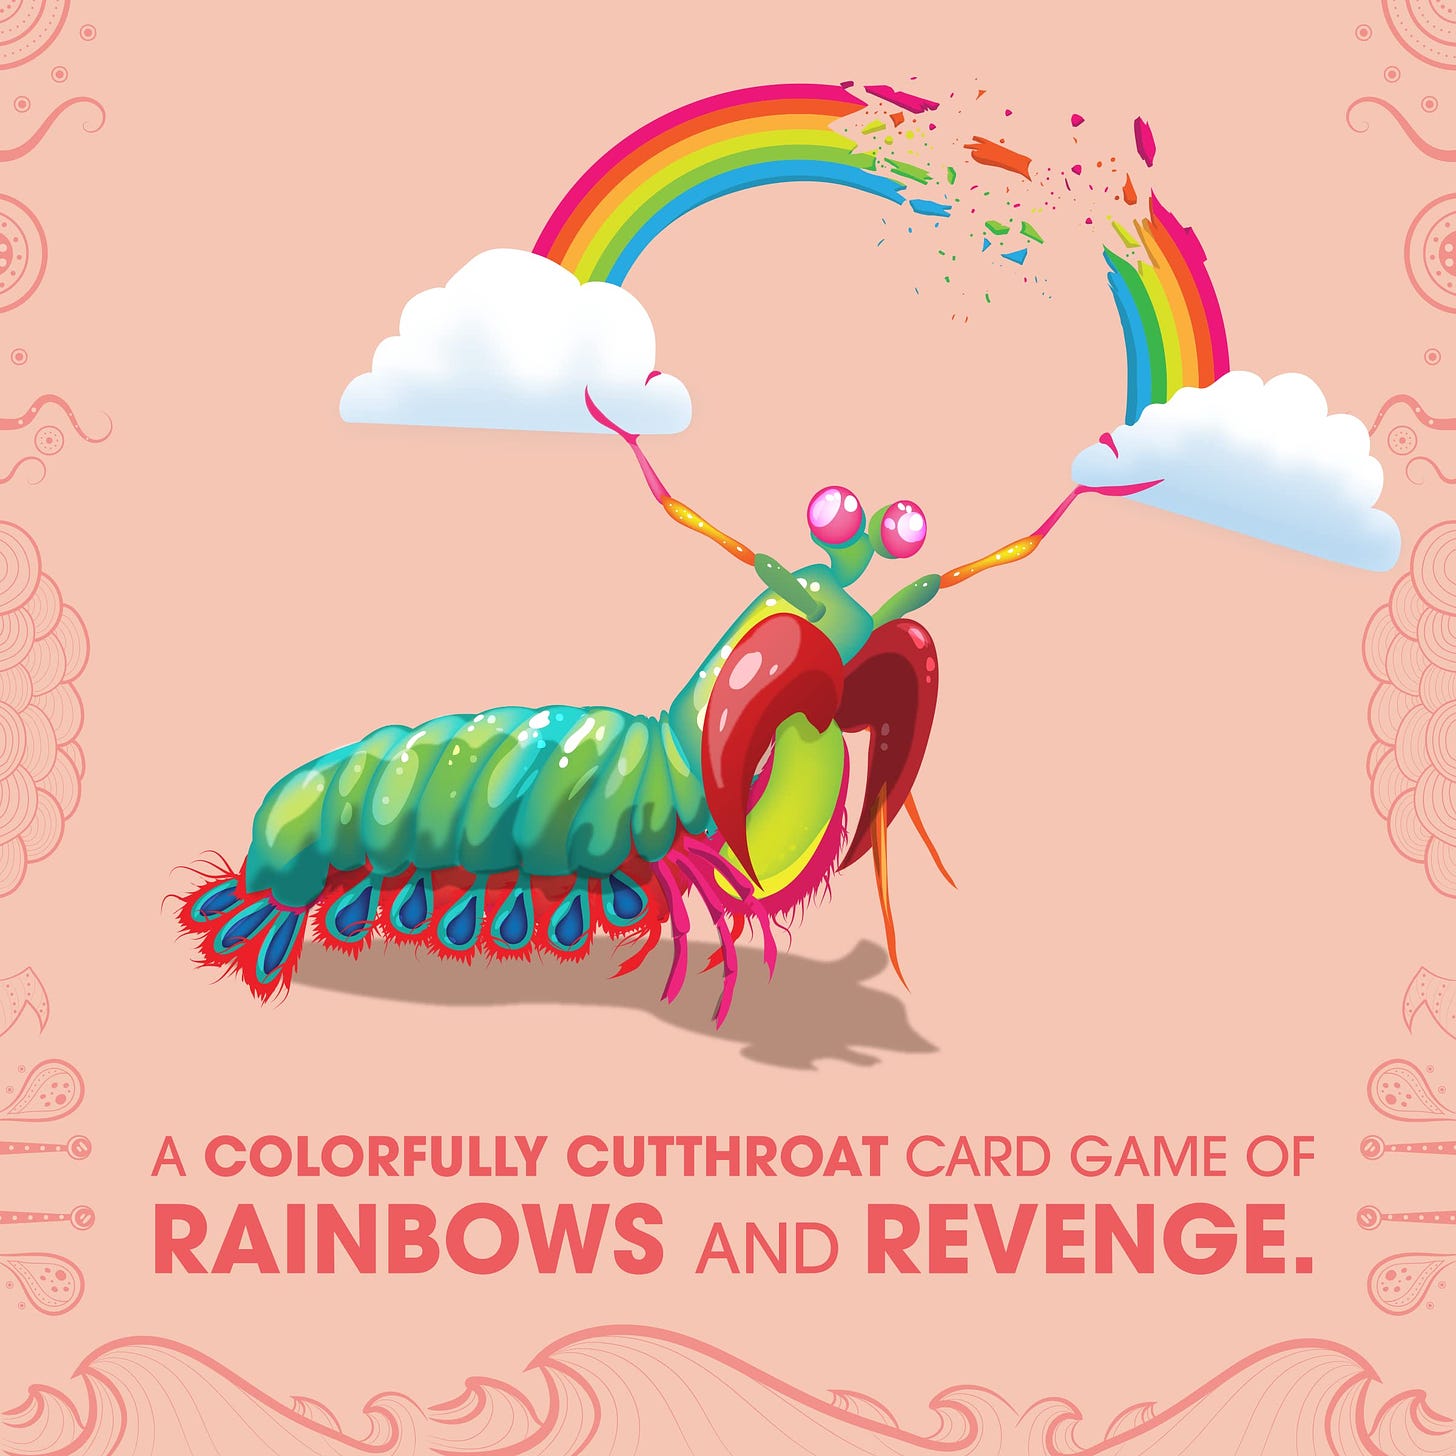 A multicolored illustration from the game "Mantis" by Exploding Kittens. There is a rainbow mantis shrimp holding a rainbow above its head. The text reads: "A colorfully cutthroat card game of rainbows and revenge."